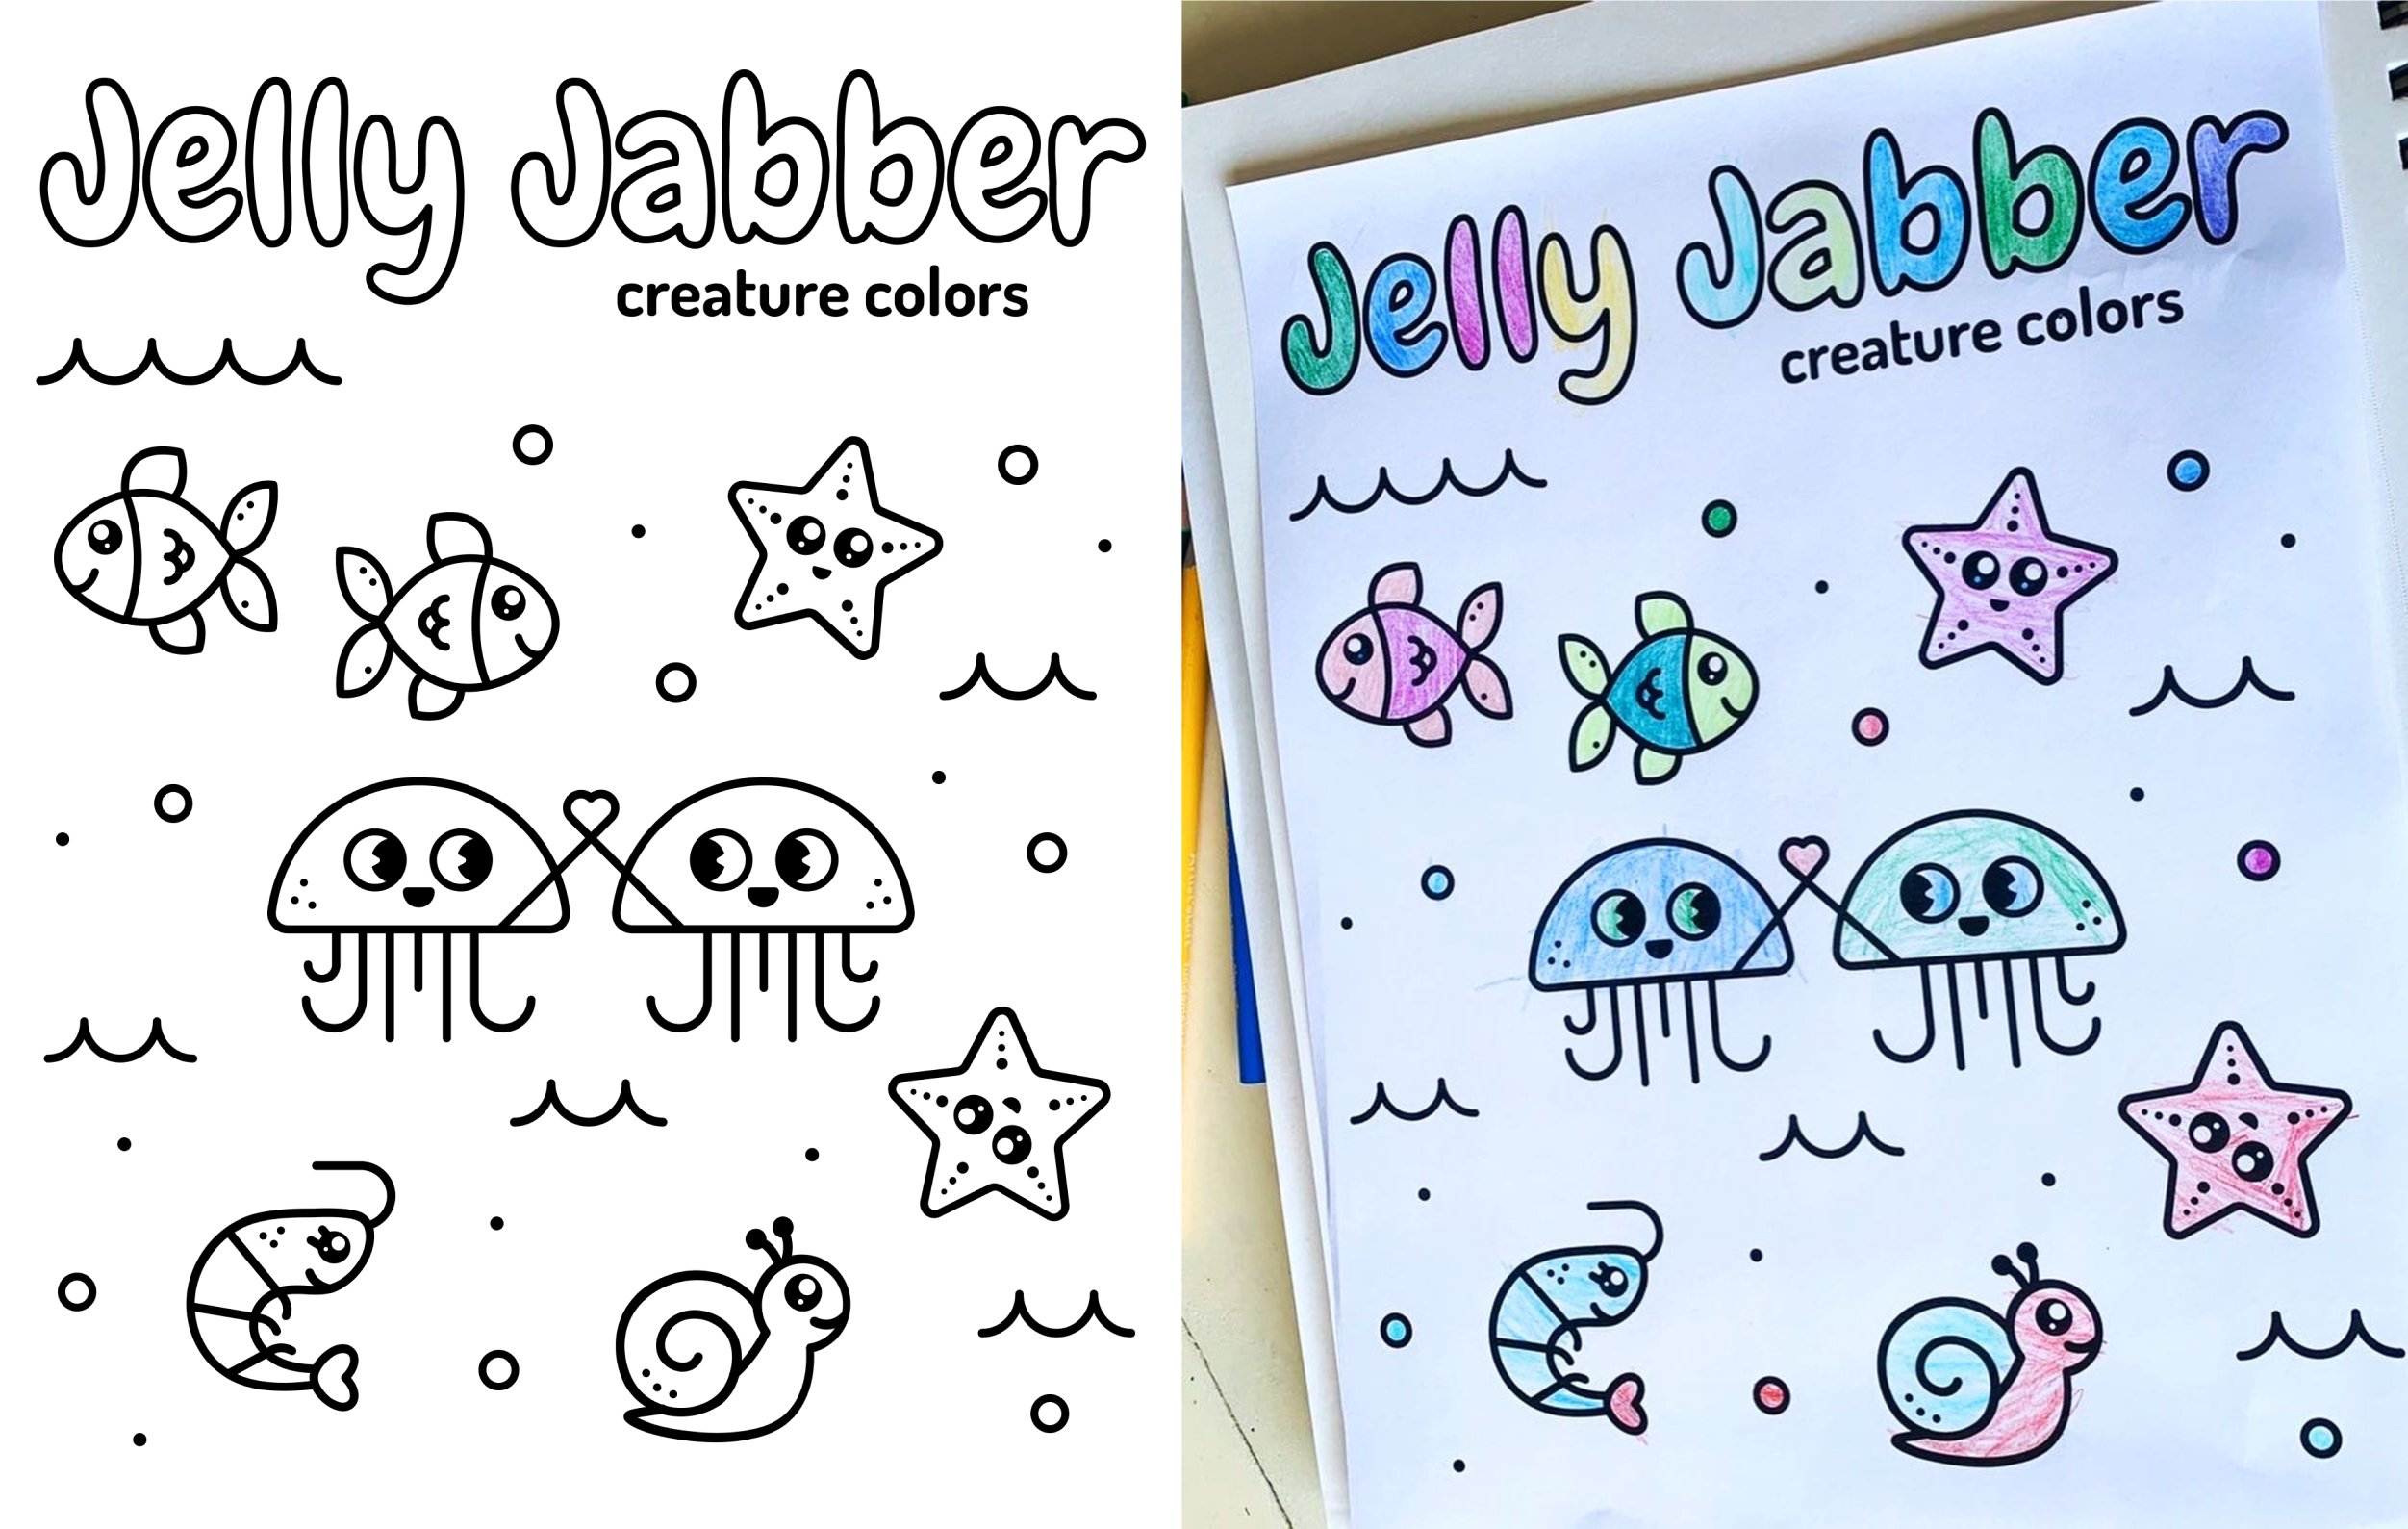 Jelly Jabber coloring sheet